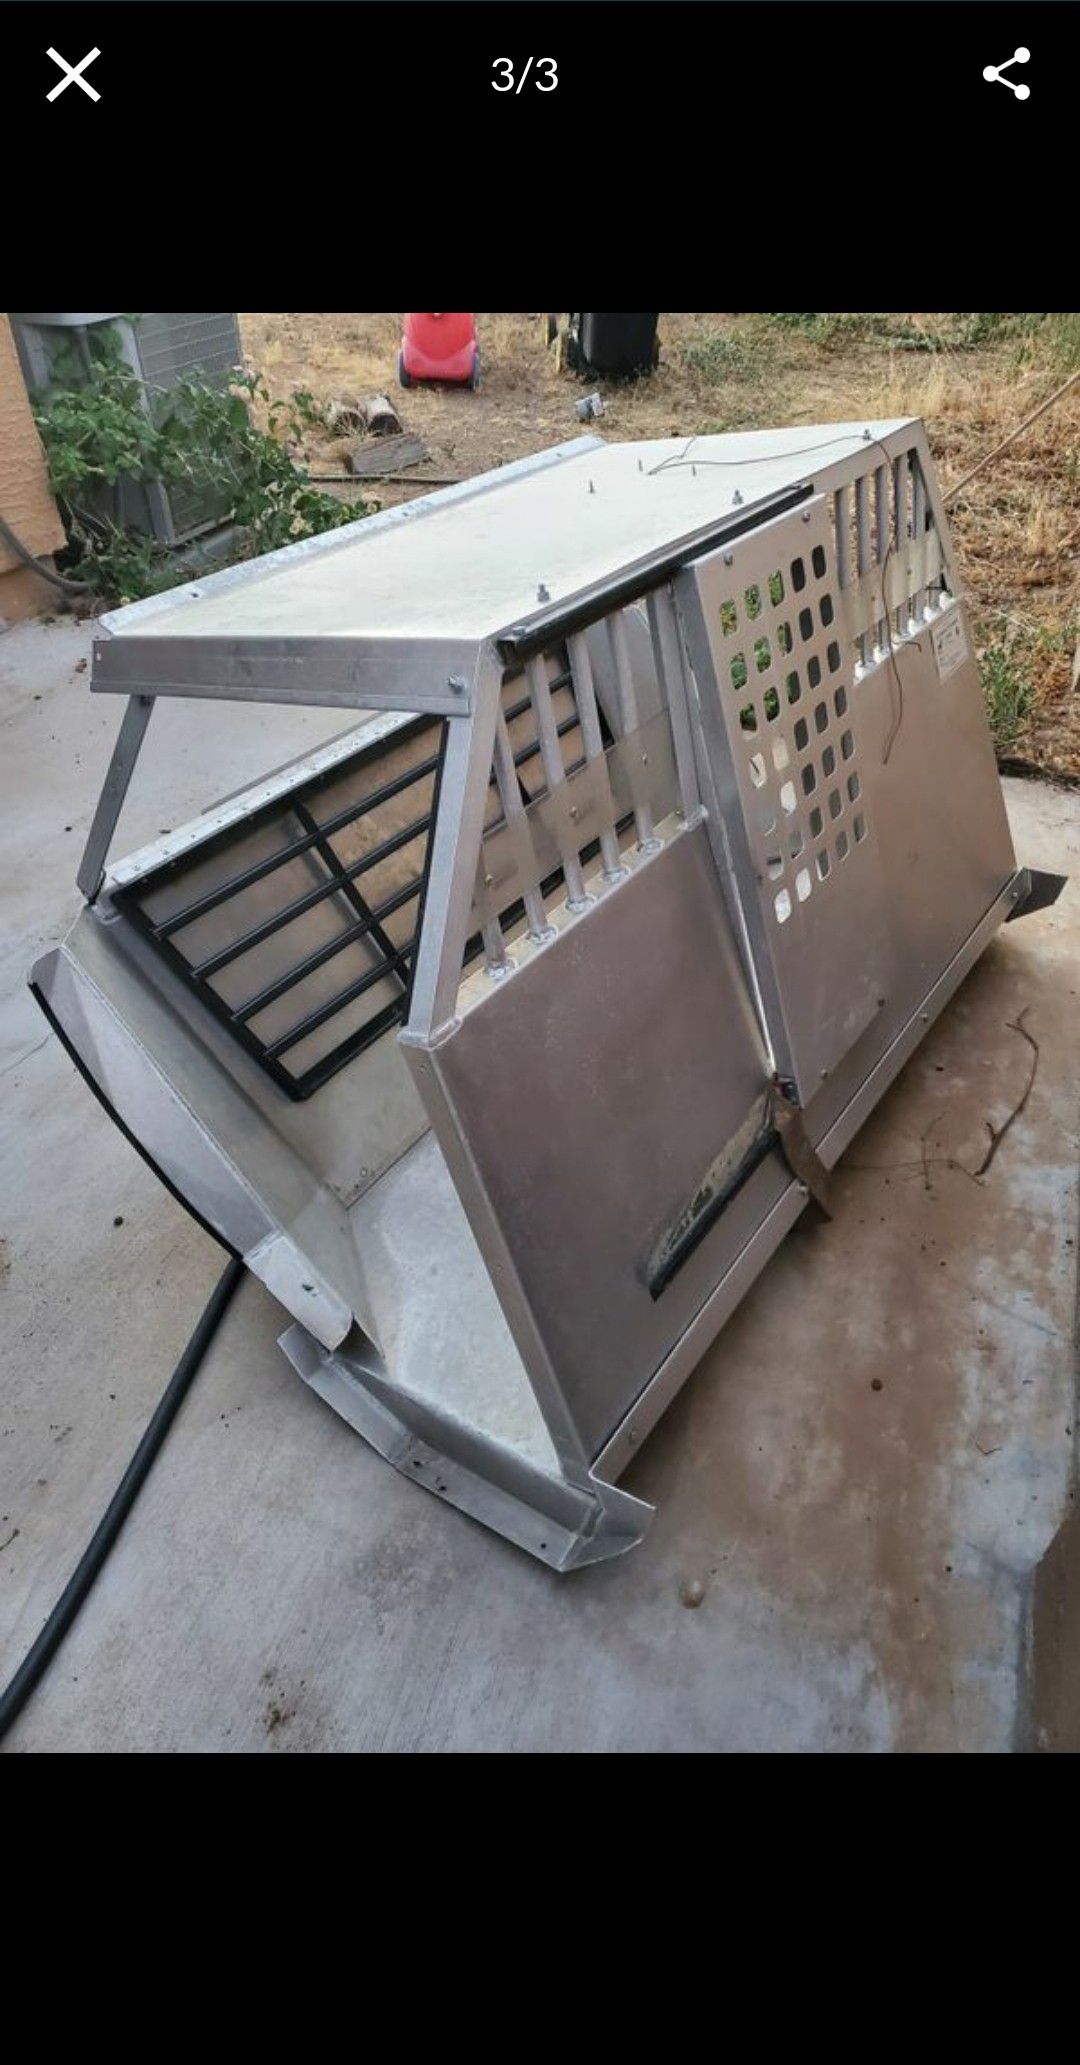 K9 Cage for vehicle or a special project fabrication